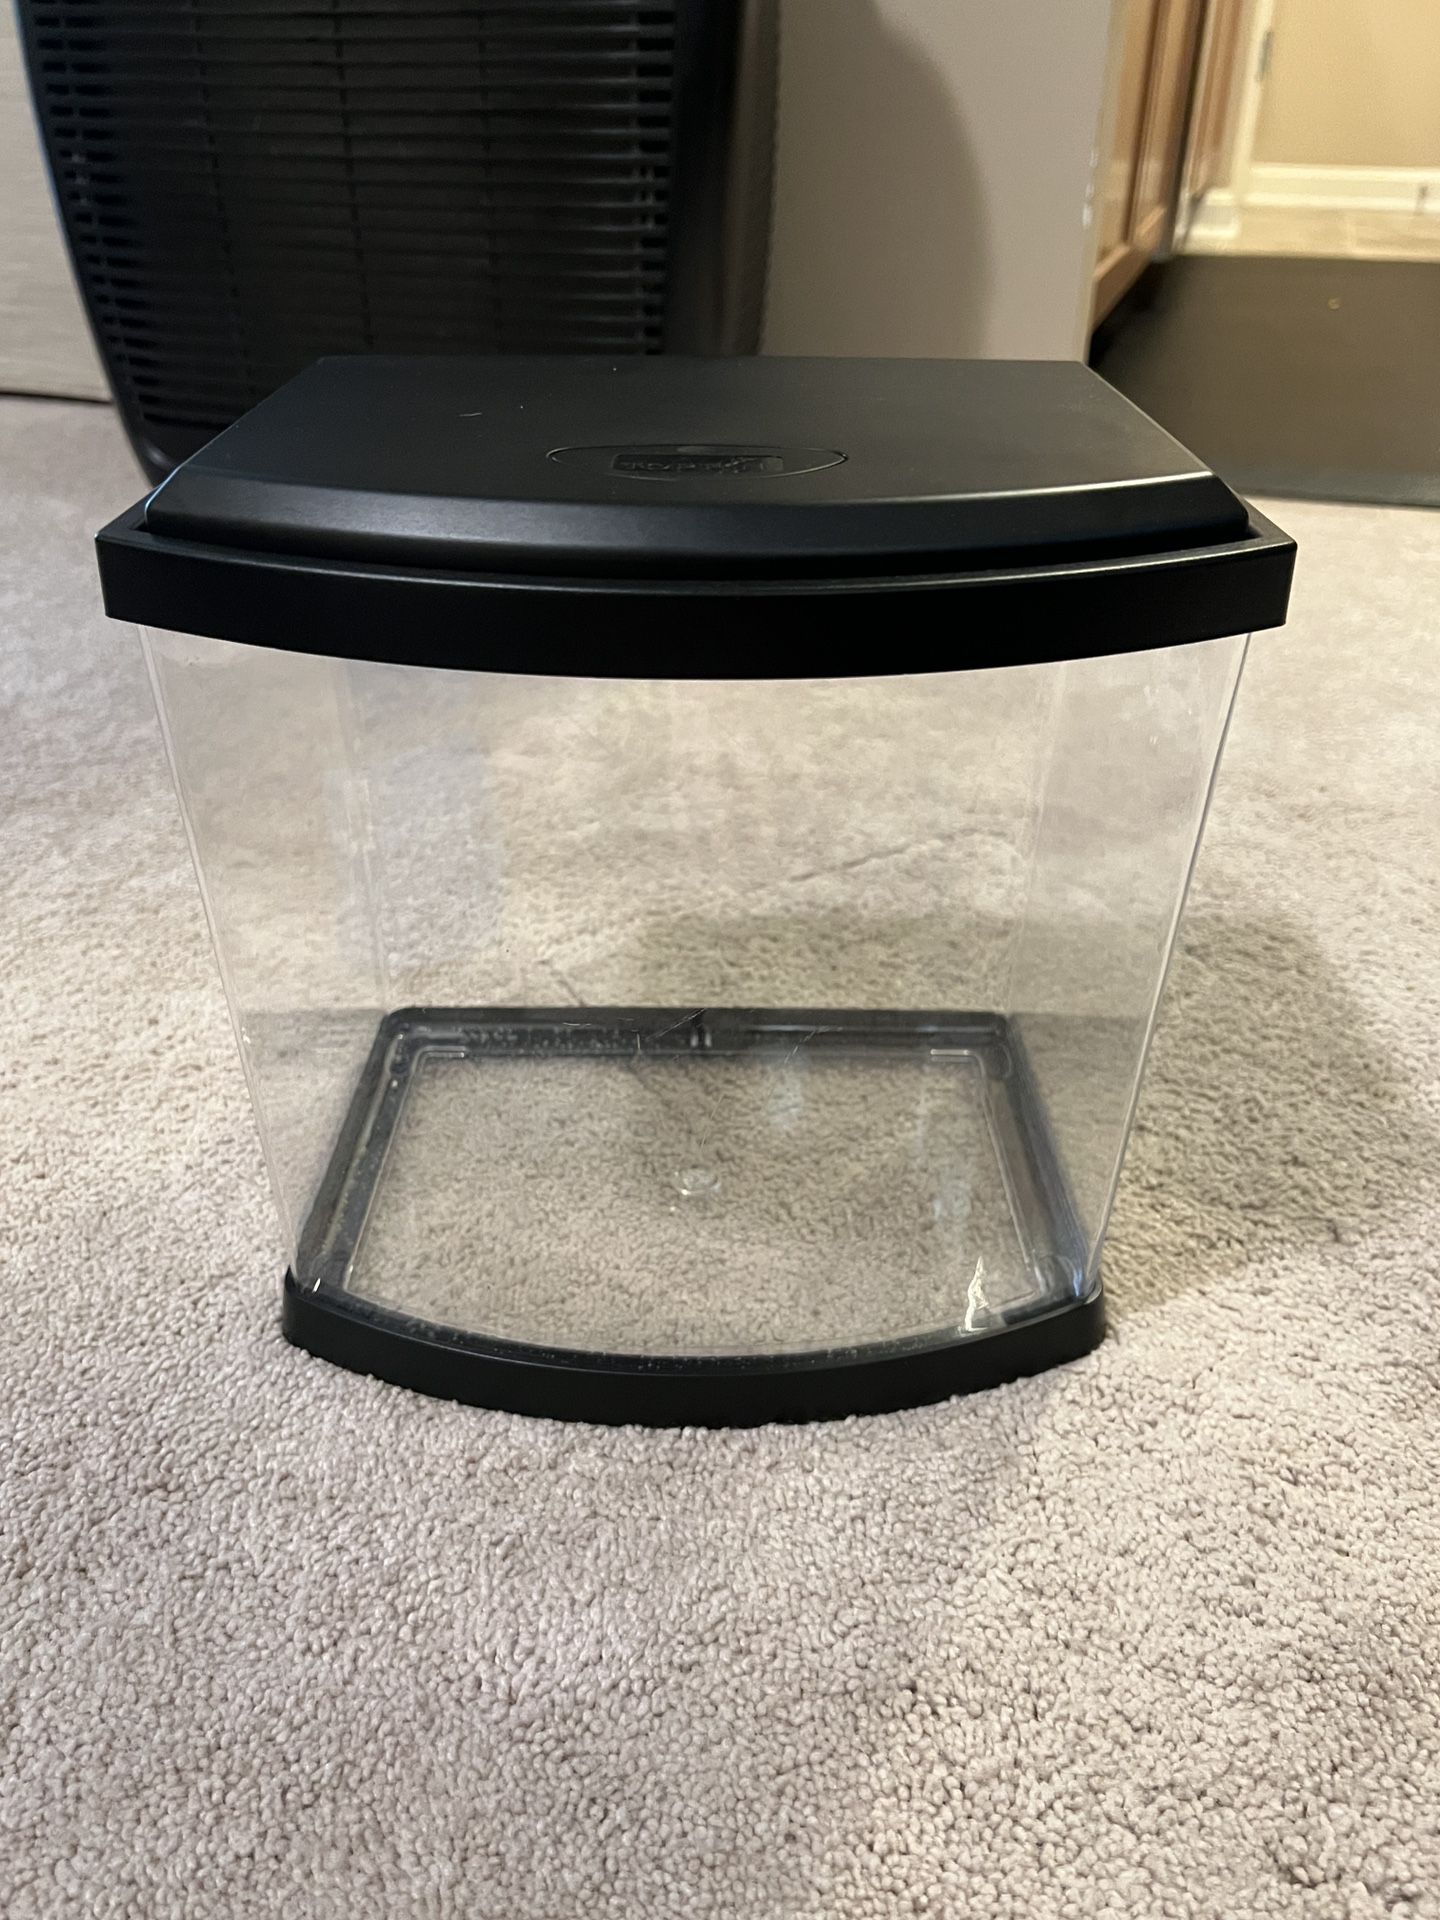 5 Gal Fish Tank With Filter Heater And Light